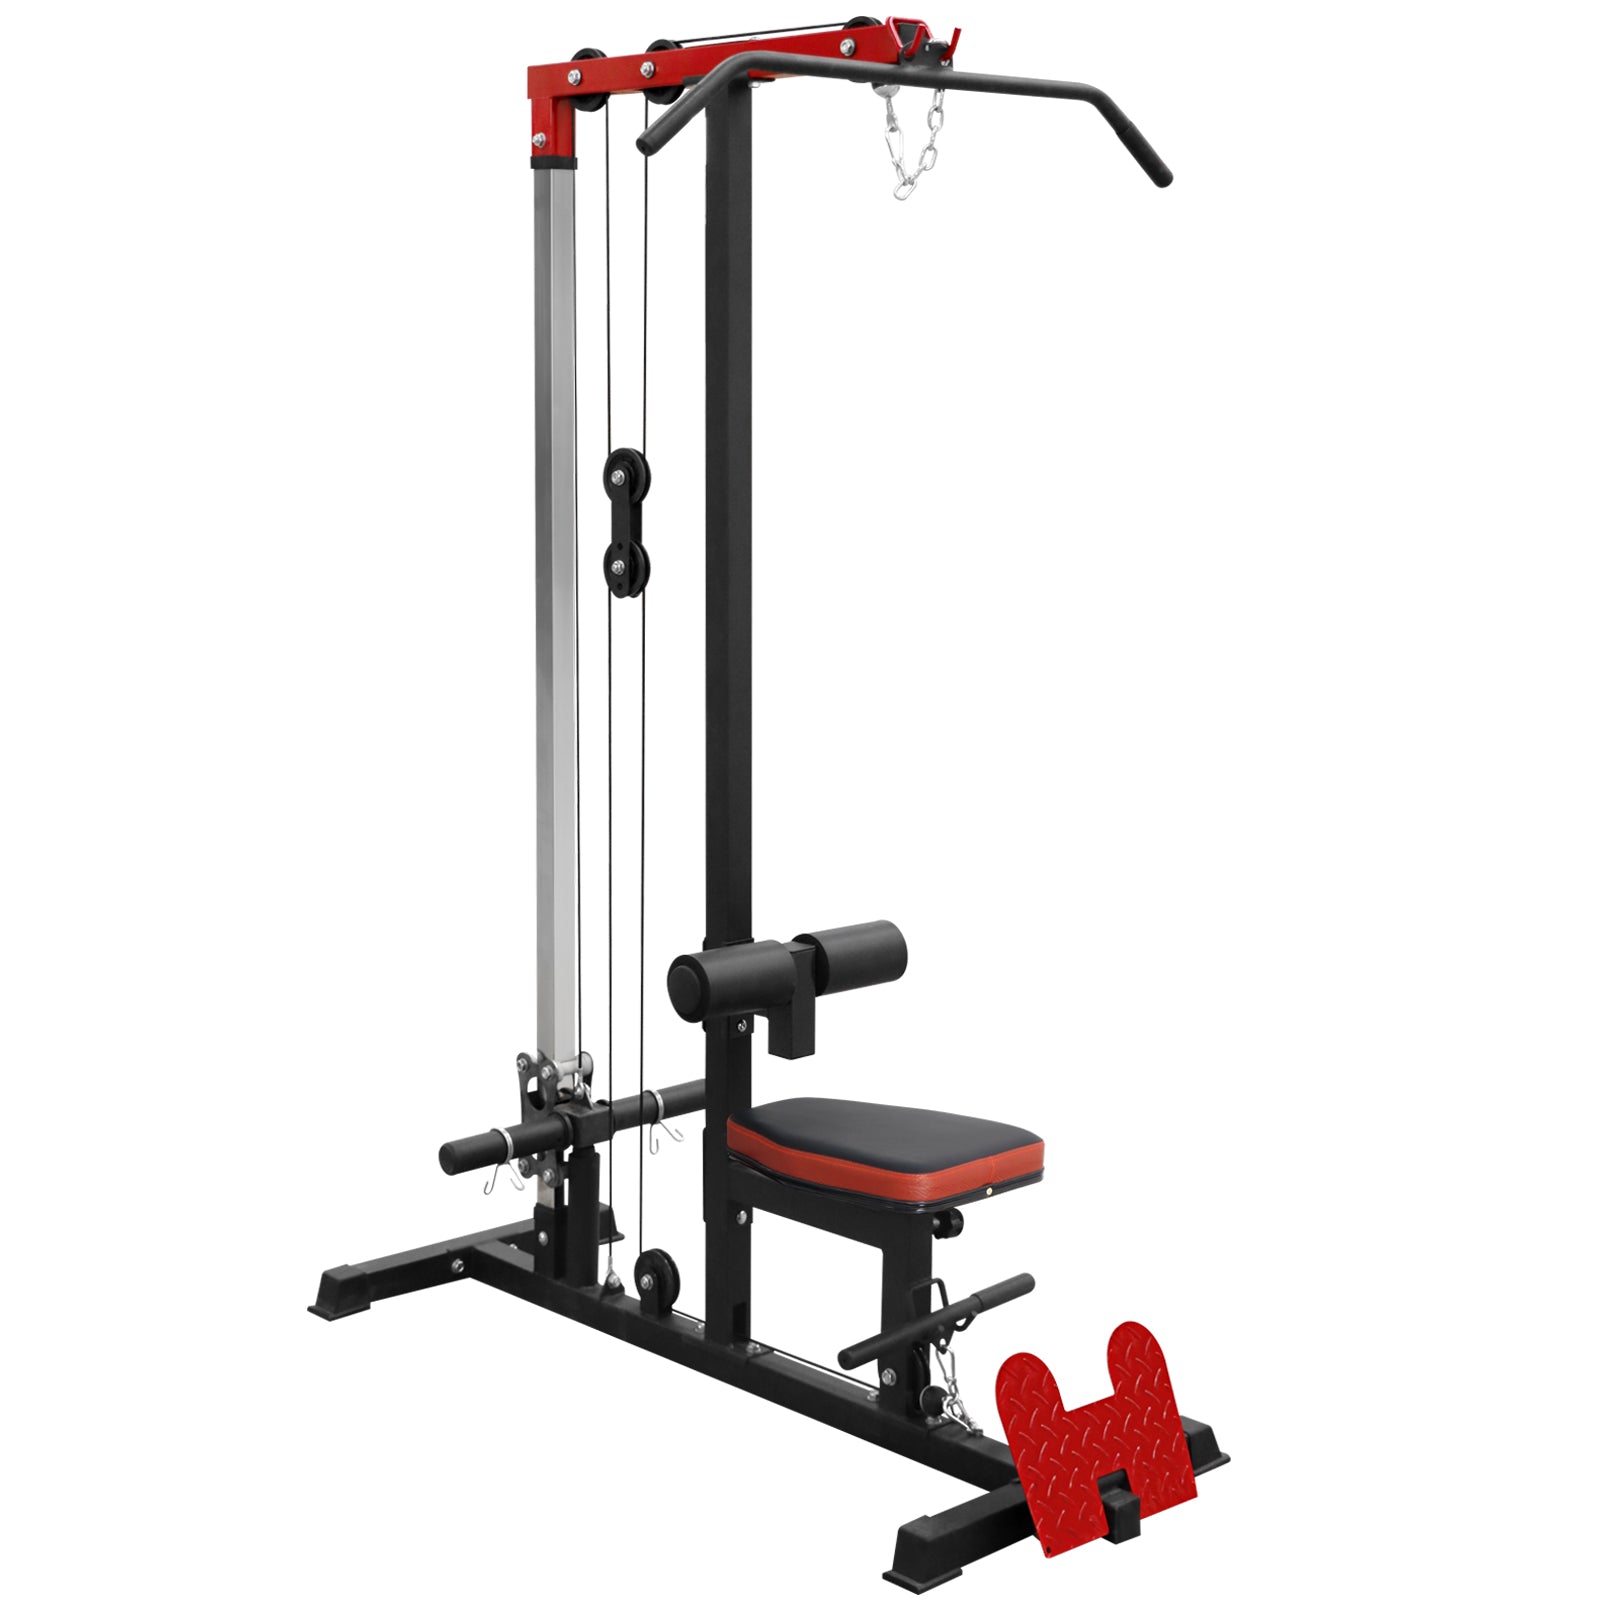 BOXERPOINT Complete Pulley System Gym for Home - 2 Pulleys with